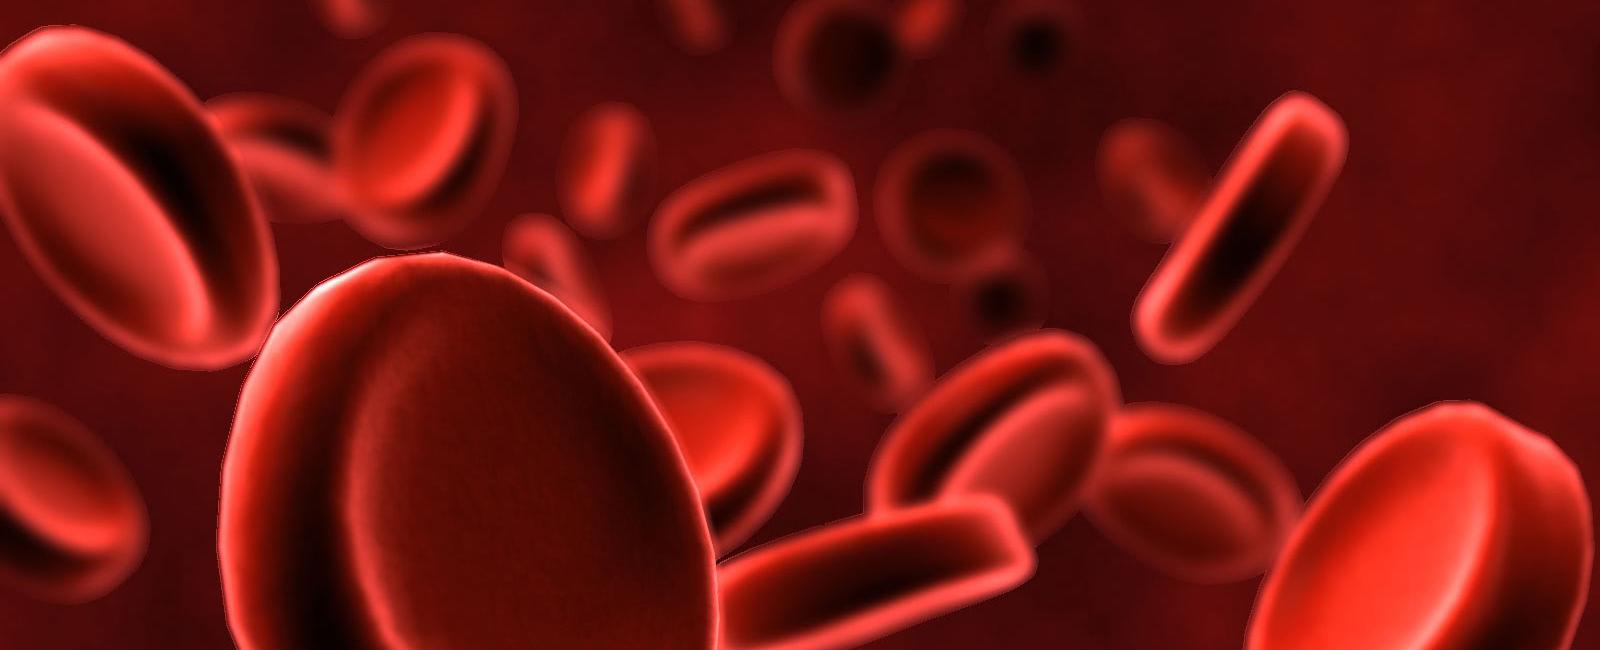 An individual blood cell takes about 60 seconds to make a complete circuit of the body